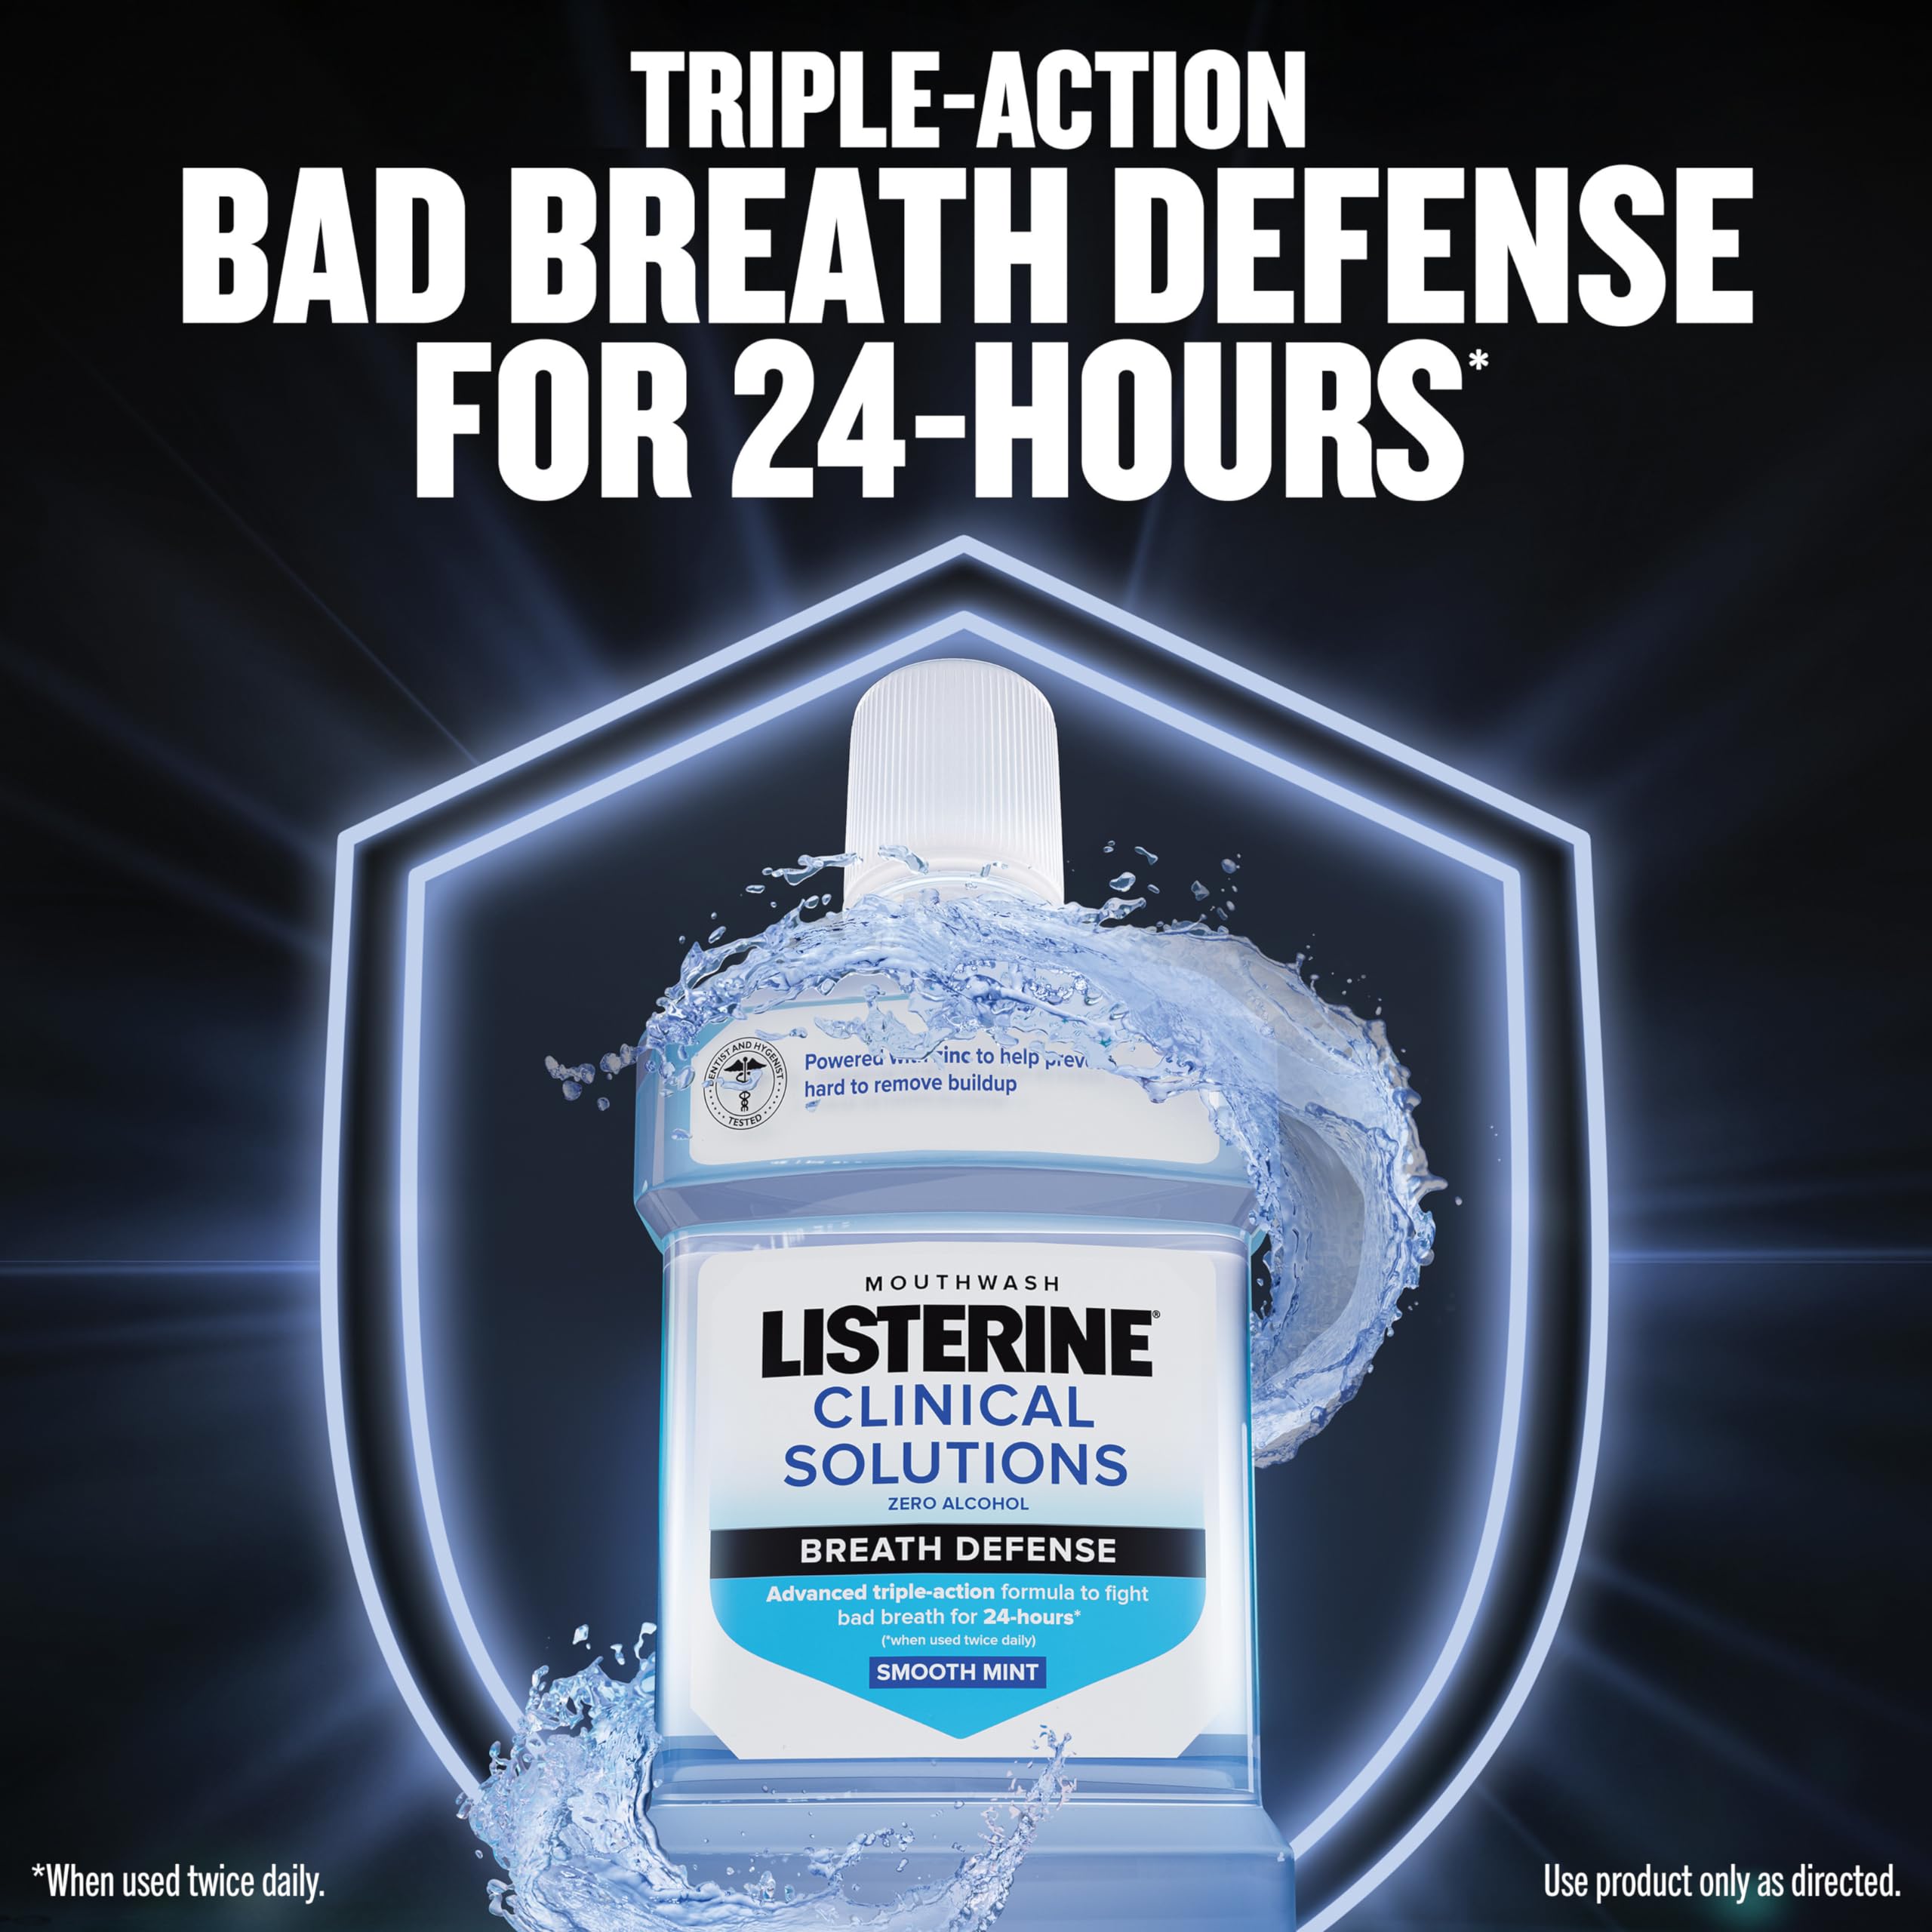 Listerine Clinical Solutions Breath Defense Zero Alcohol Mouthwash, Alcohol-Free Mouthwash with a Triple-Action Formula Fights Bad Breath for 24 Hours, Smooth Mint Oral Rinse, 500 mL